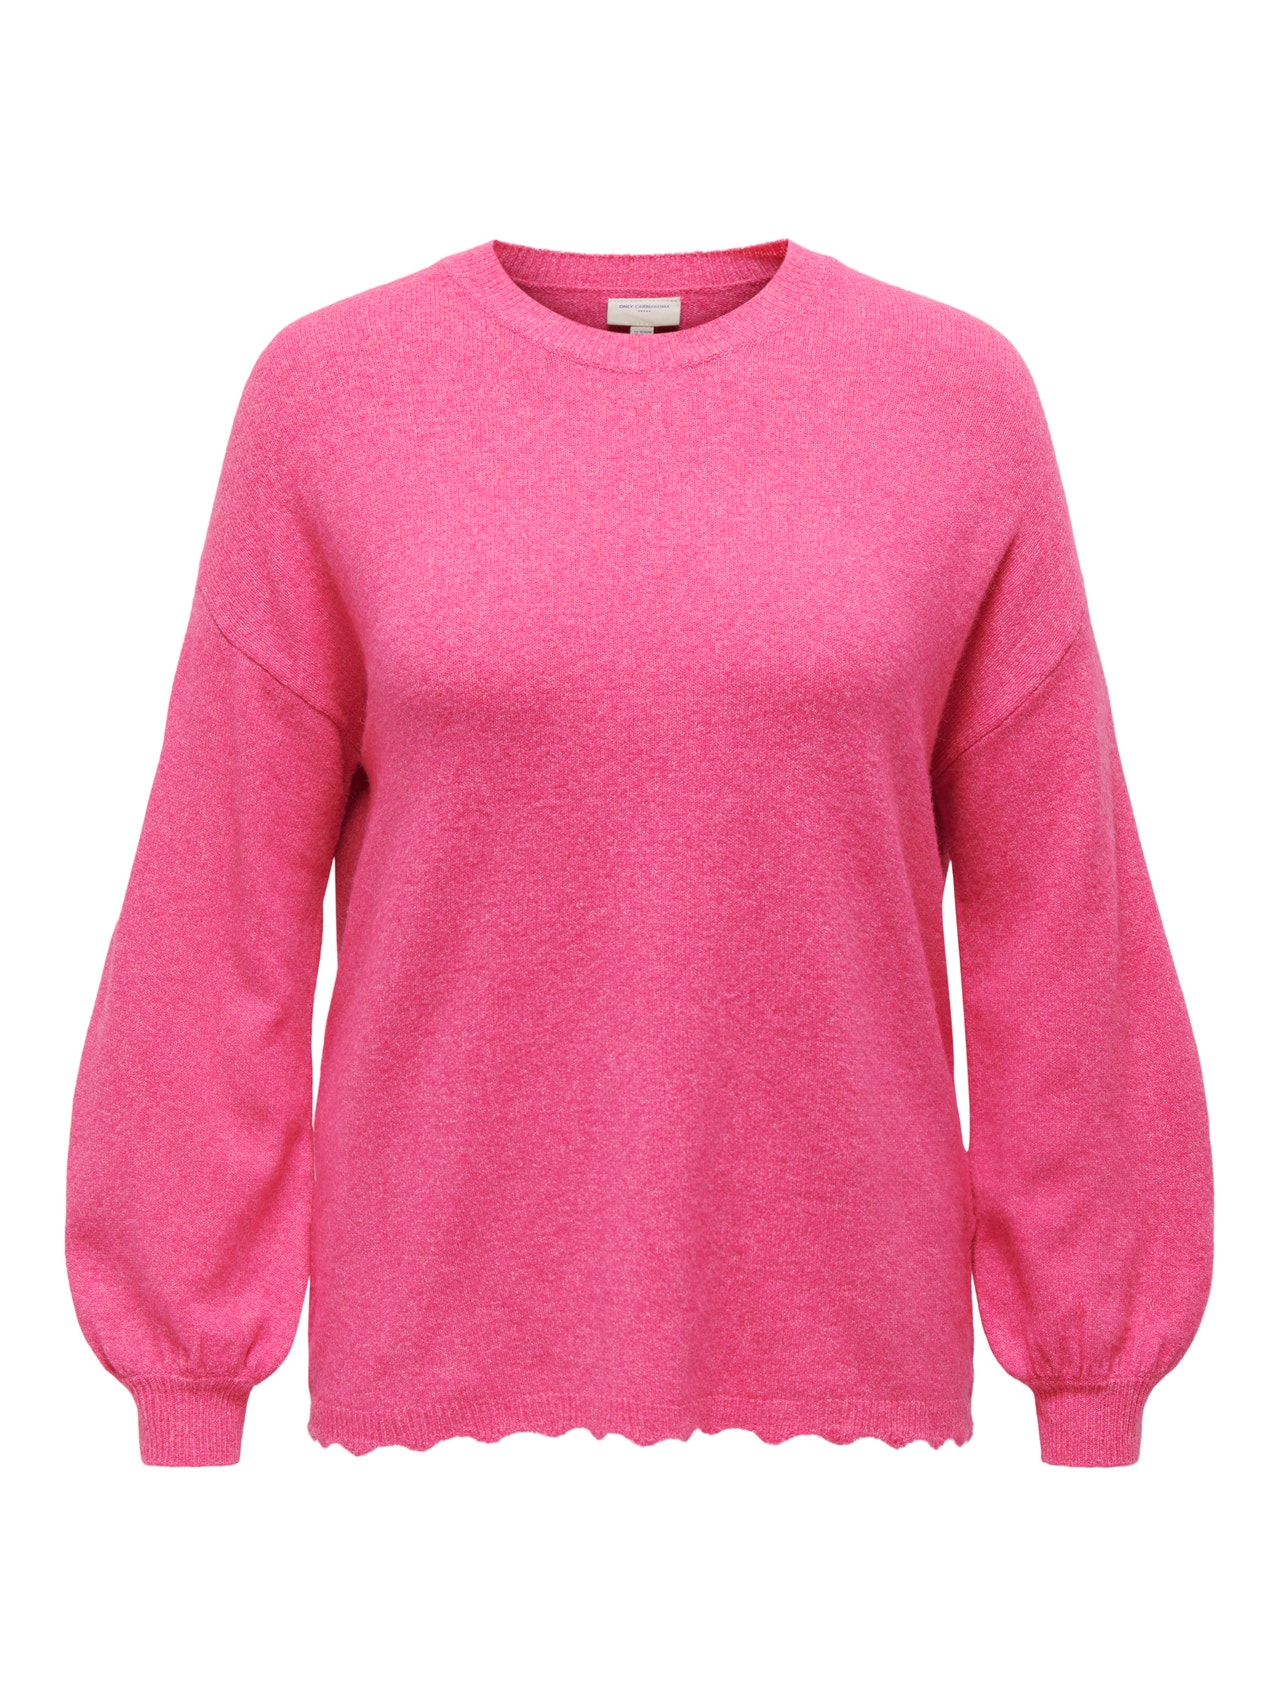 ONLY Curvy Solid colored Knitted Pullover -Fuchsia Purple - 15289366